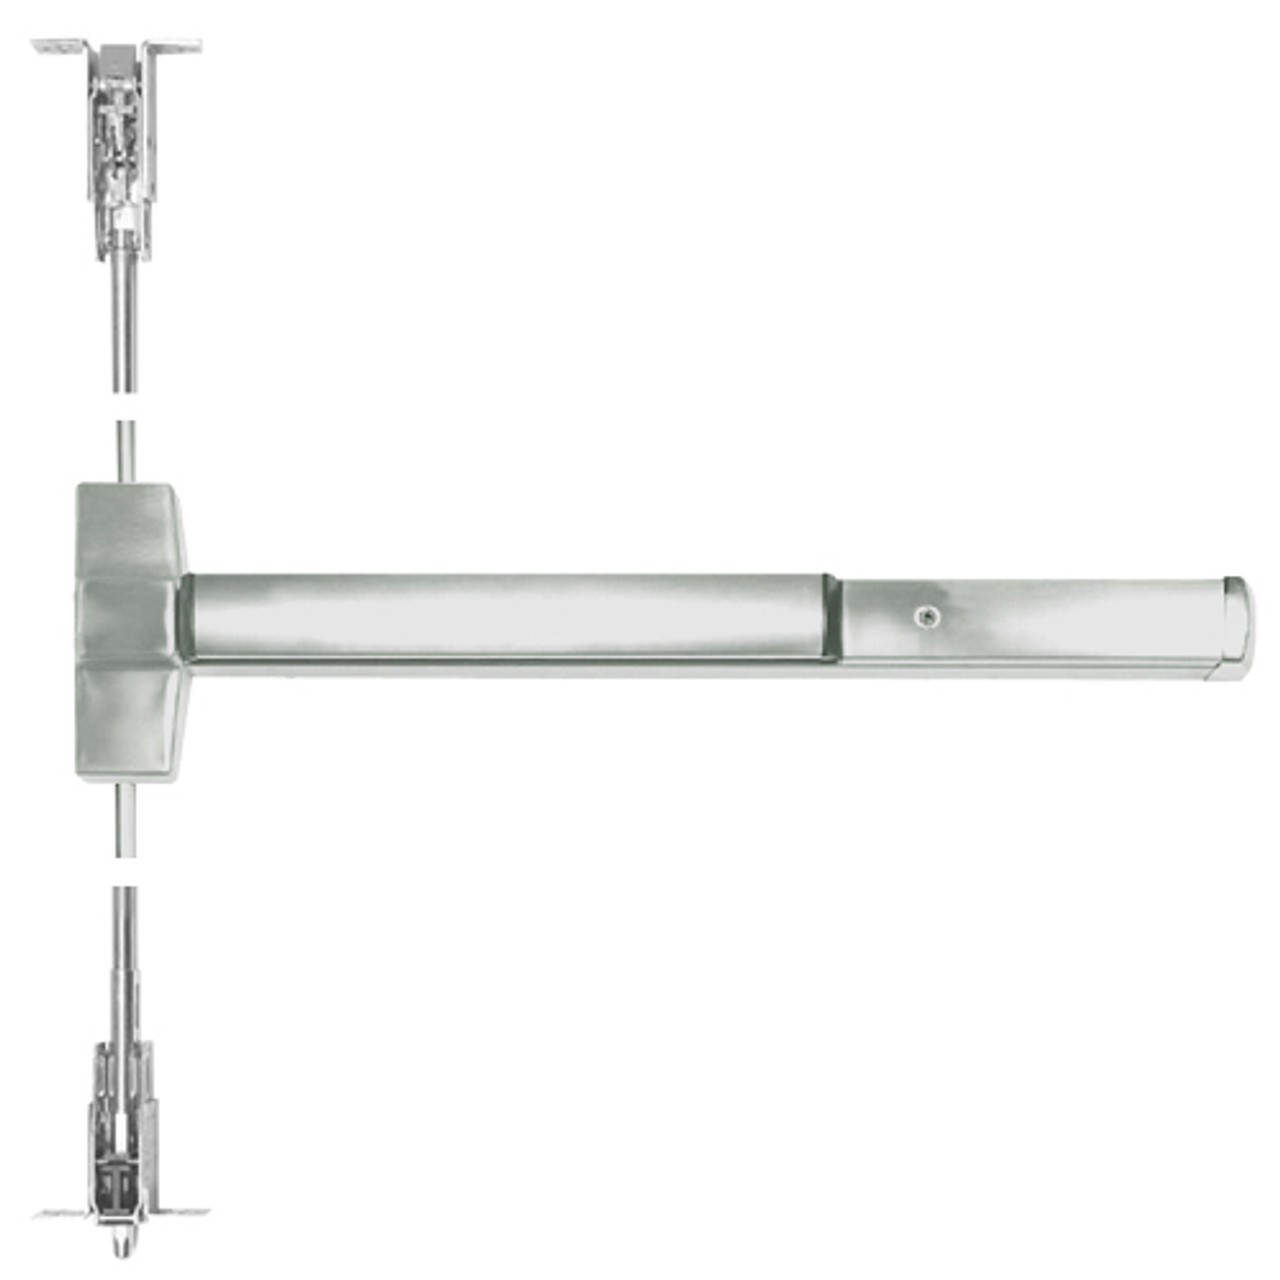 ED5860-619-W048-MELR-M92 Corbin ED5800 Series Non Fire Rated Concealed Vertical Rod Device with Motor Latch Retraction and Touchbar Monitoring in Satin Nickel Finish